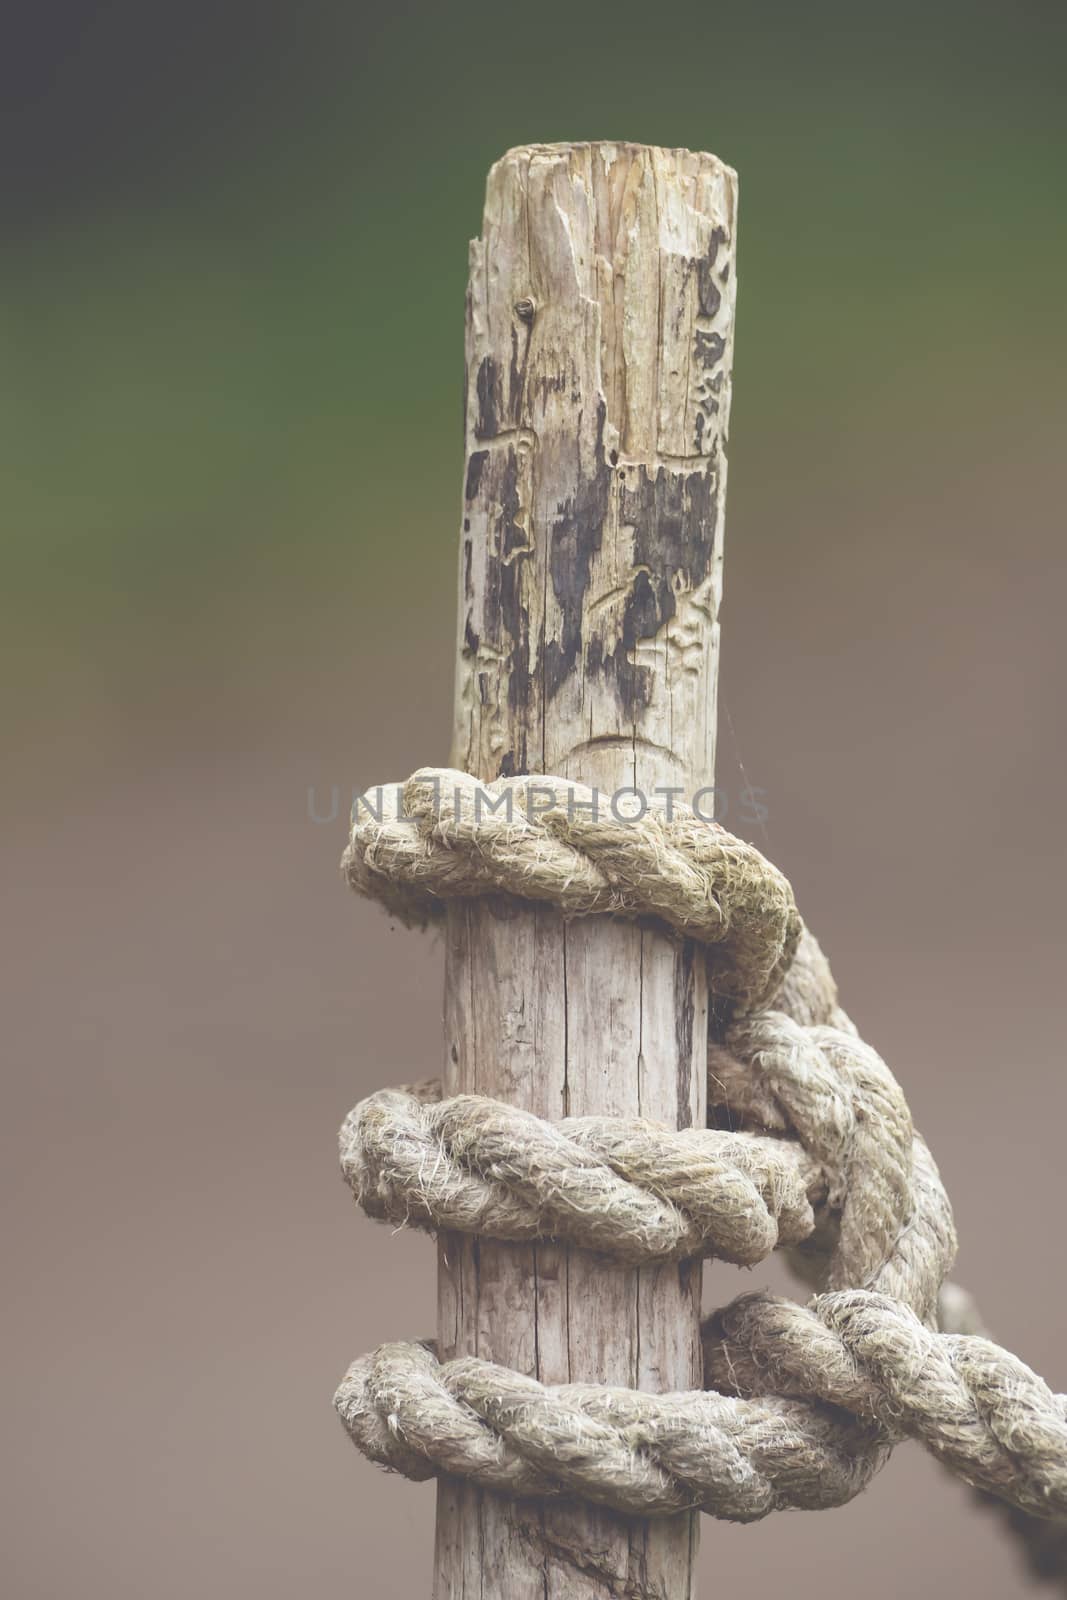 Knot from a rope on a wood